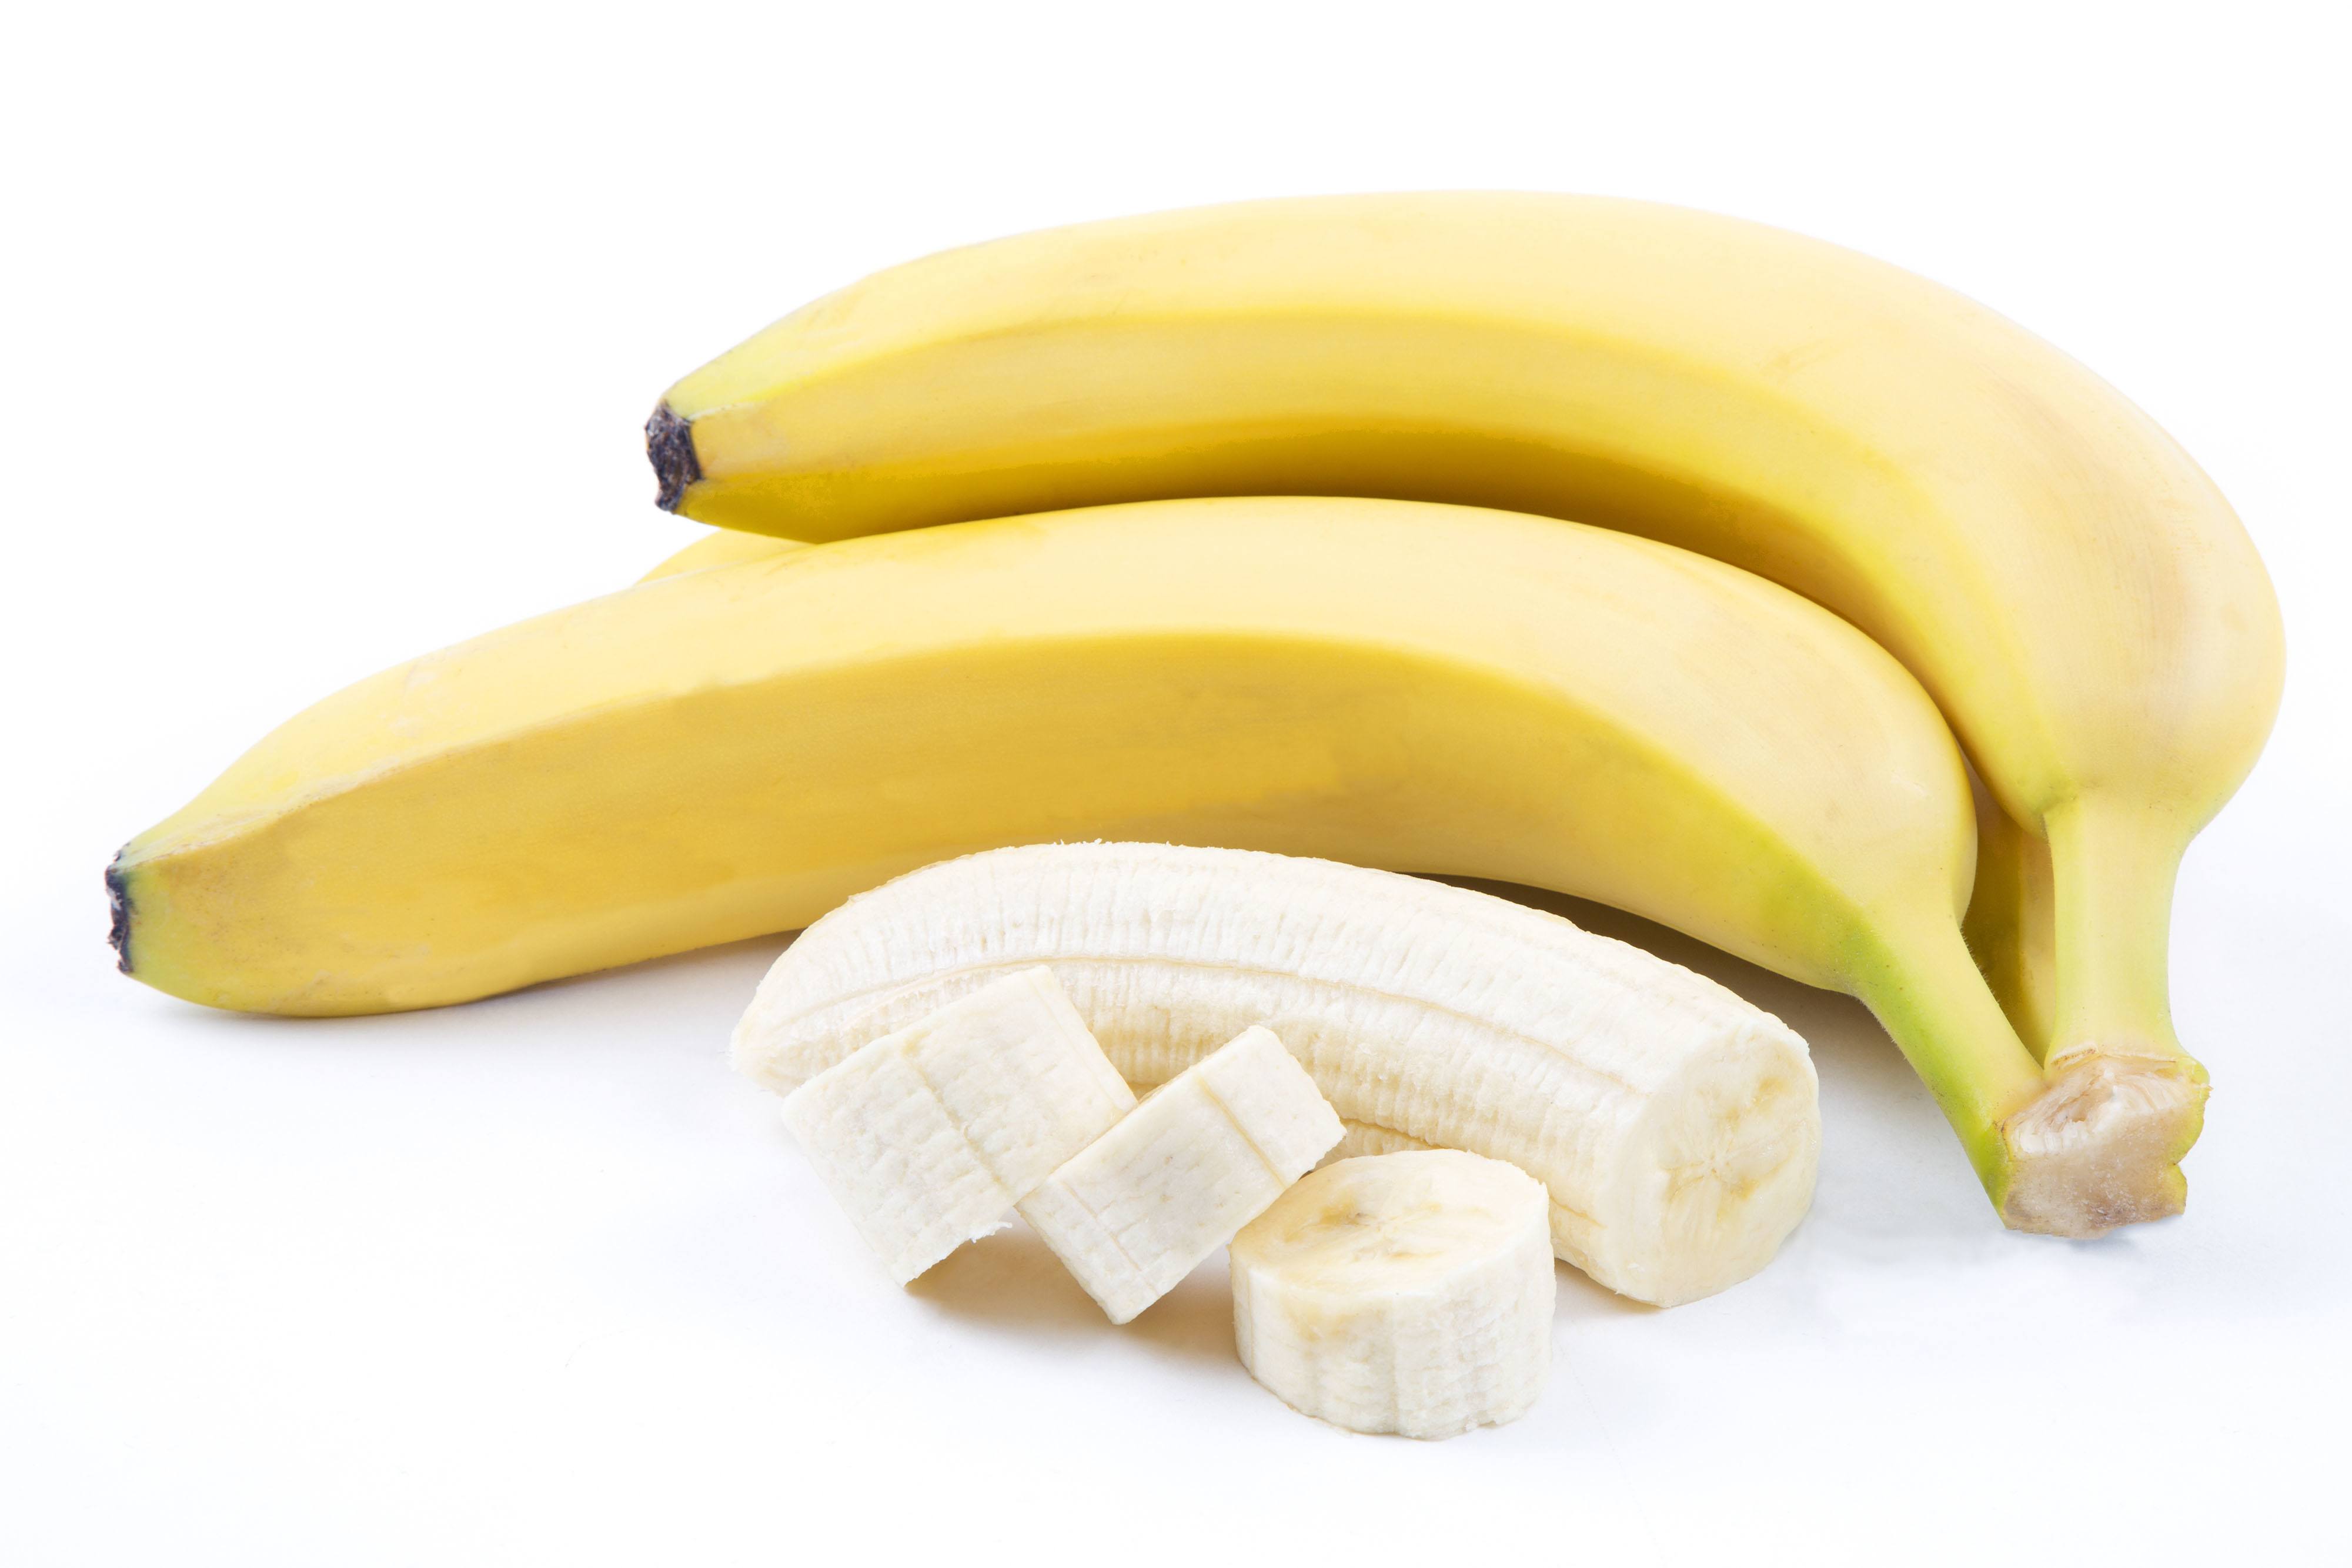 17 Banana Facts That'll BLOW YOUR MIND